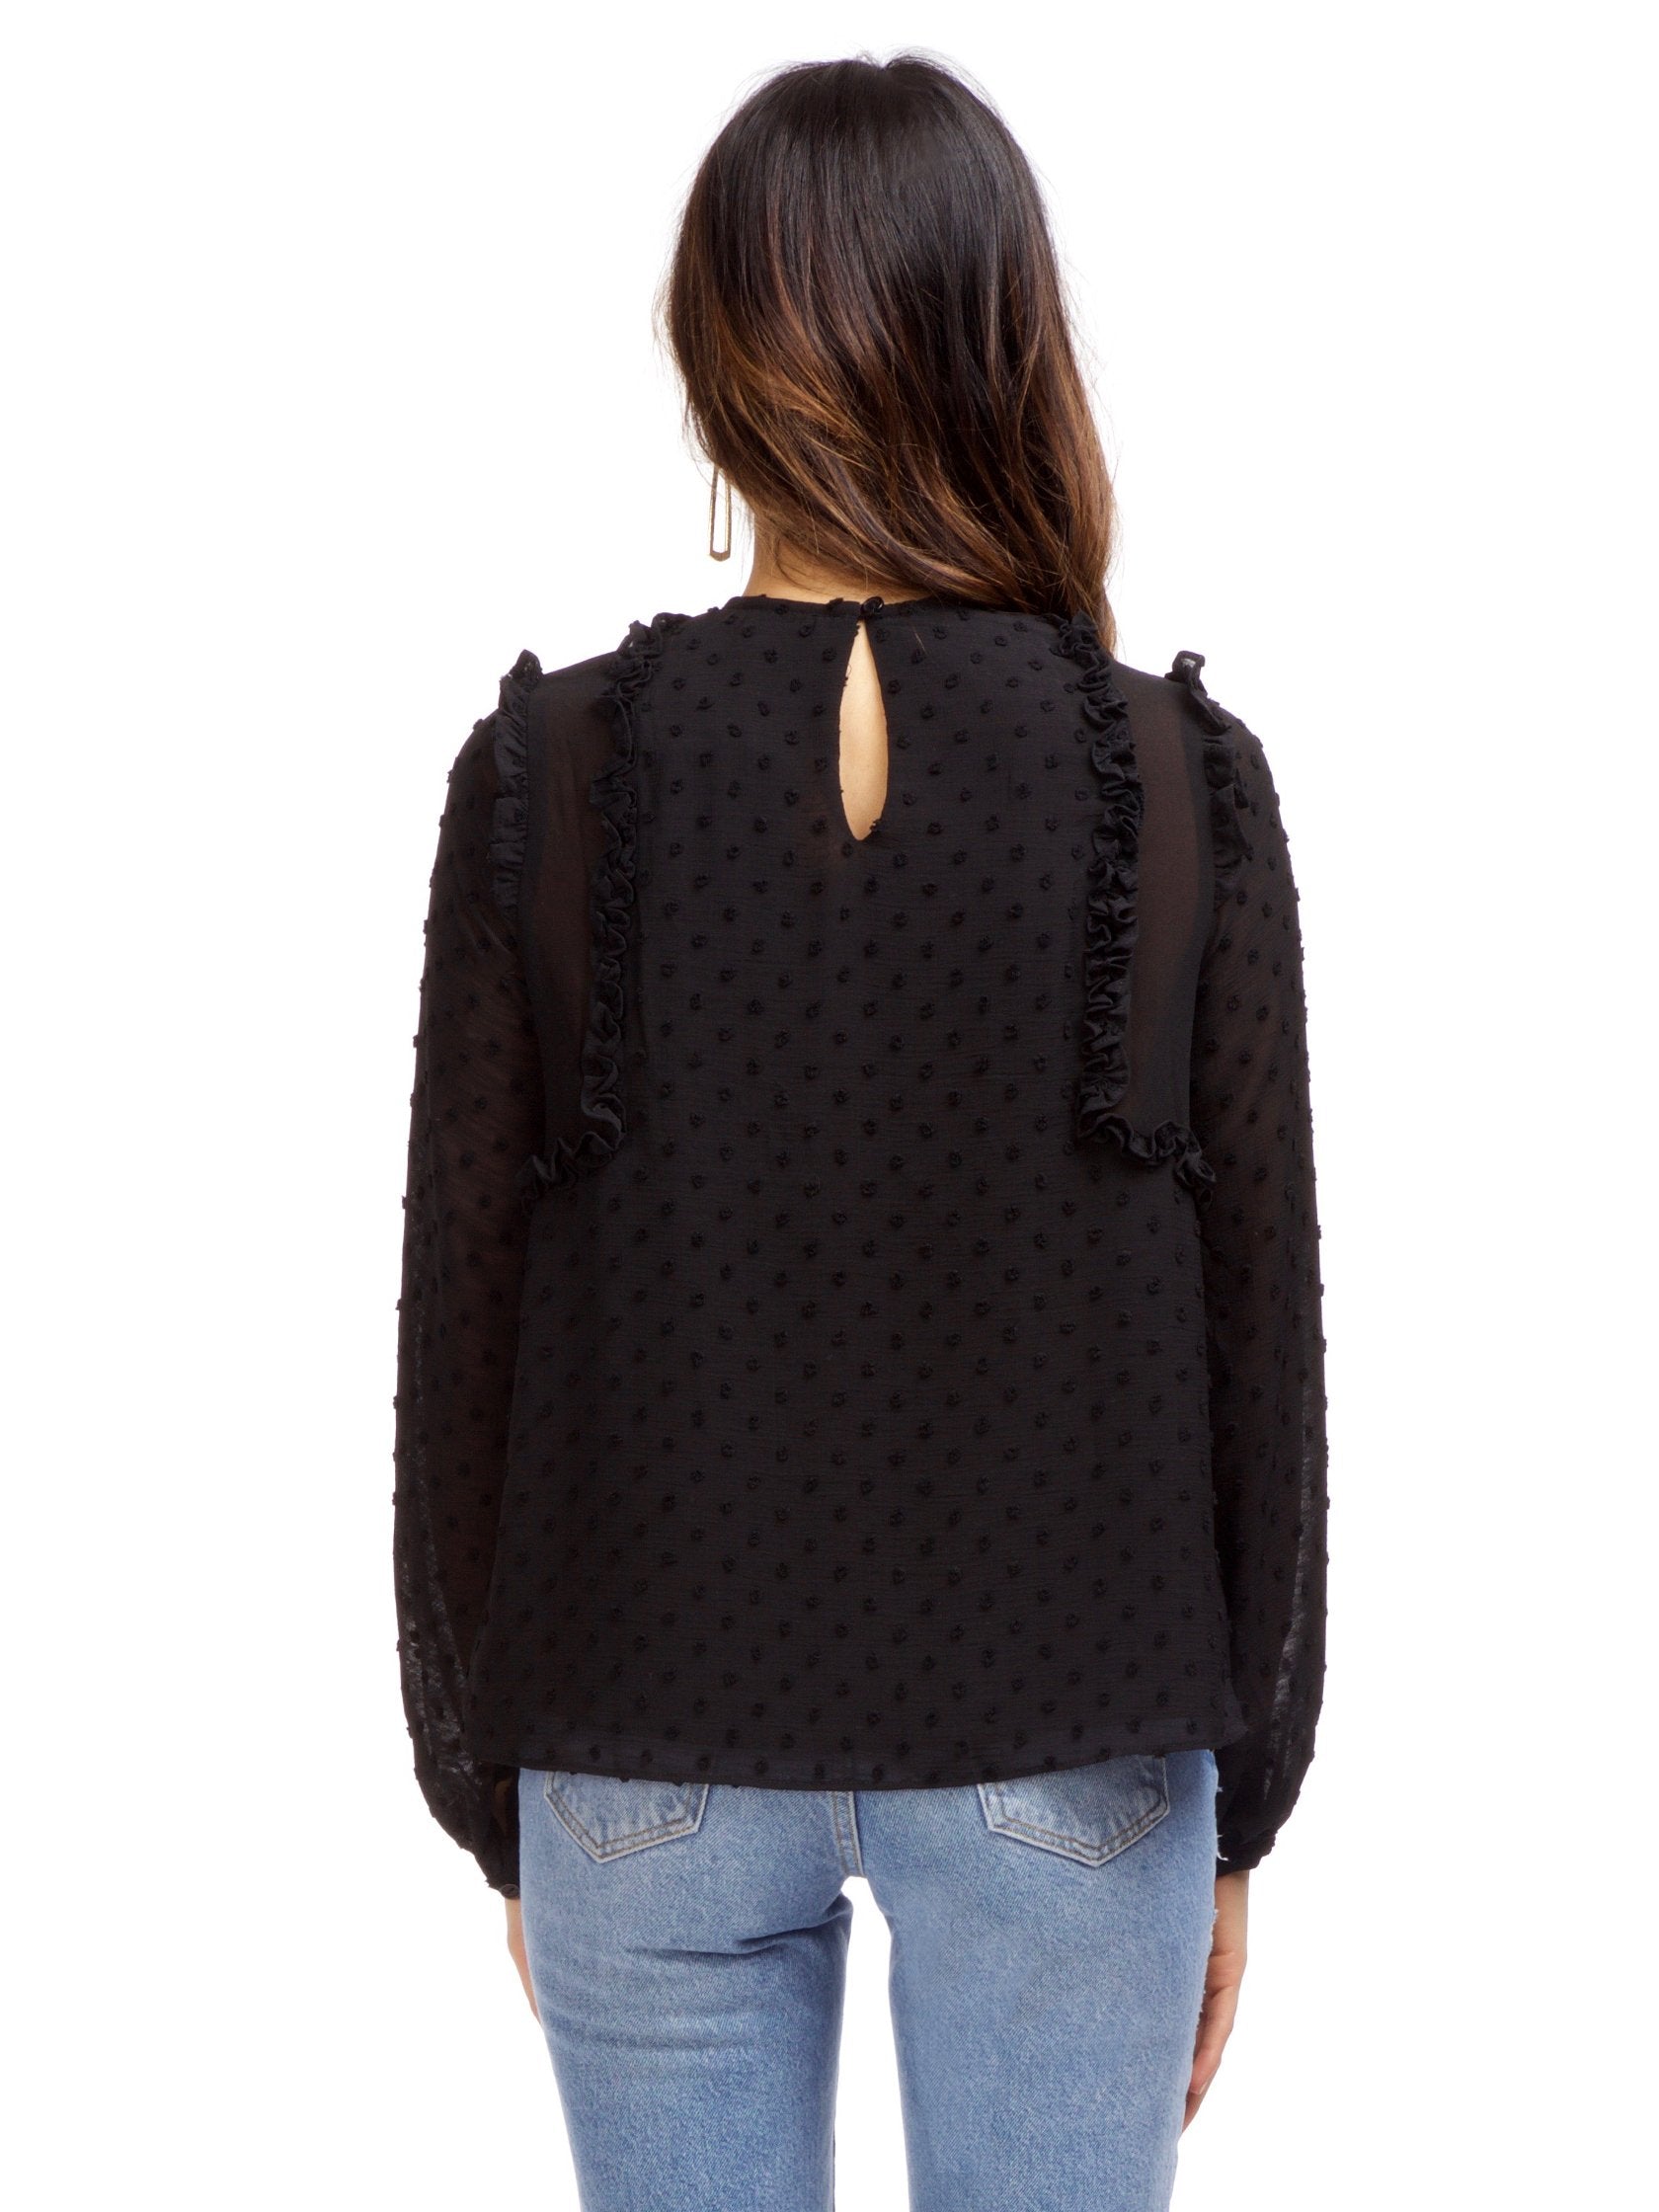 Women outfit in a top rental from Strut & Bolt called Dotted Ruffle Long Sleeve Top